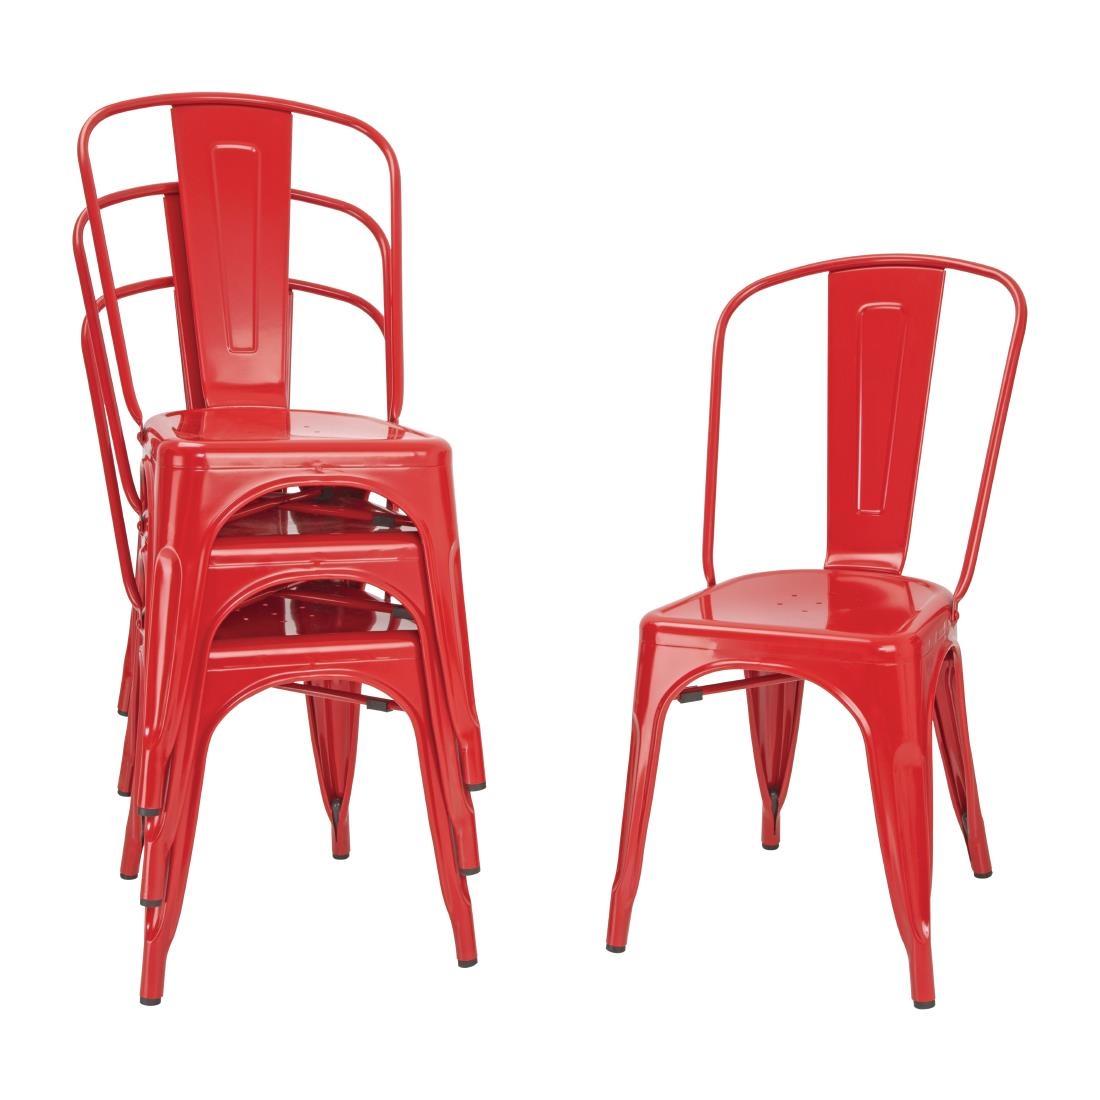 Bolero Bistro Steel Side Chair Red (Pack of 4) - GL330  - 4